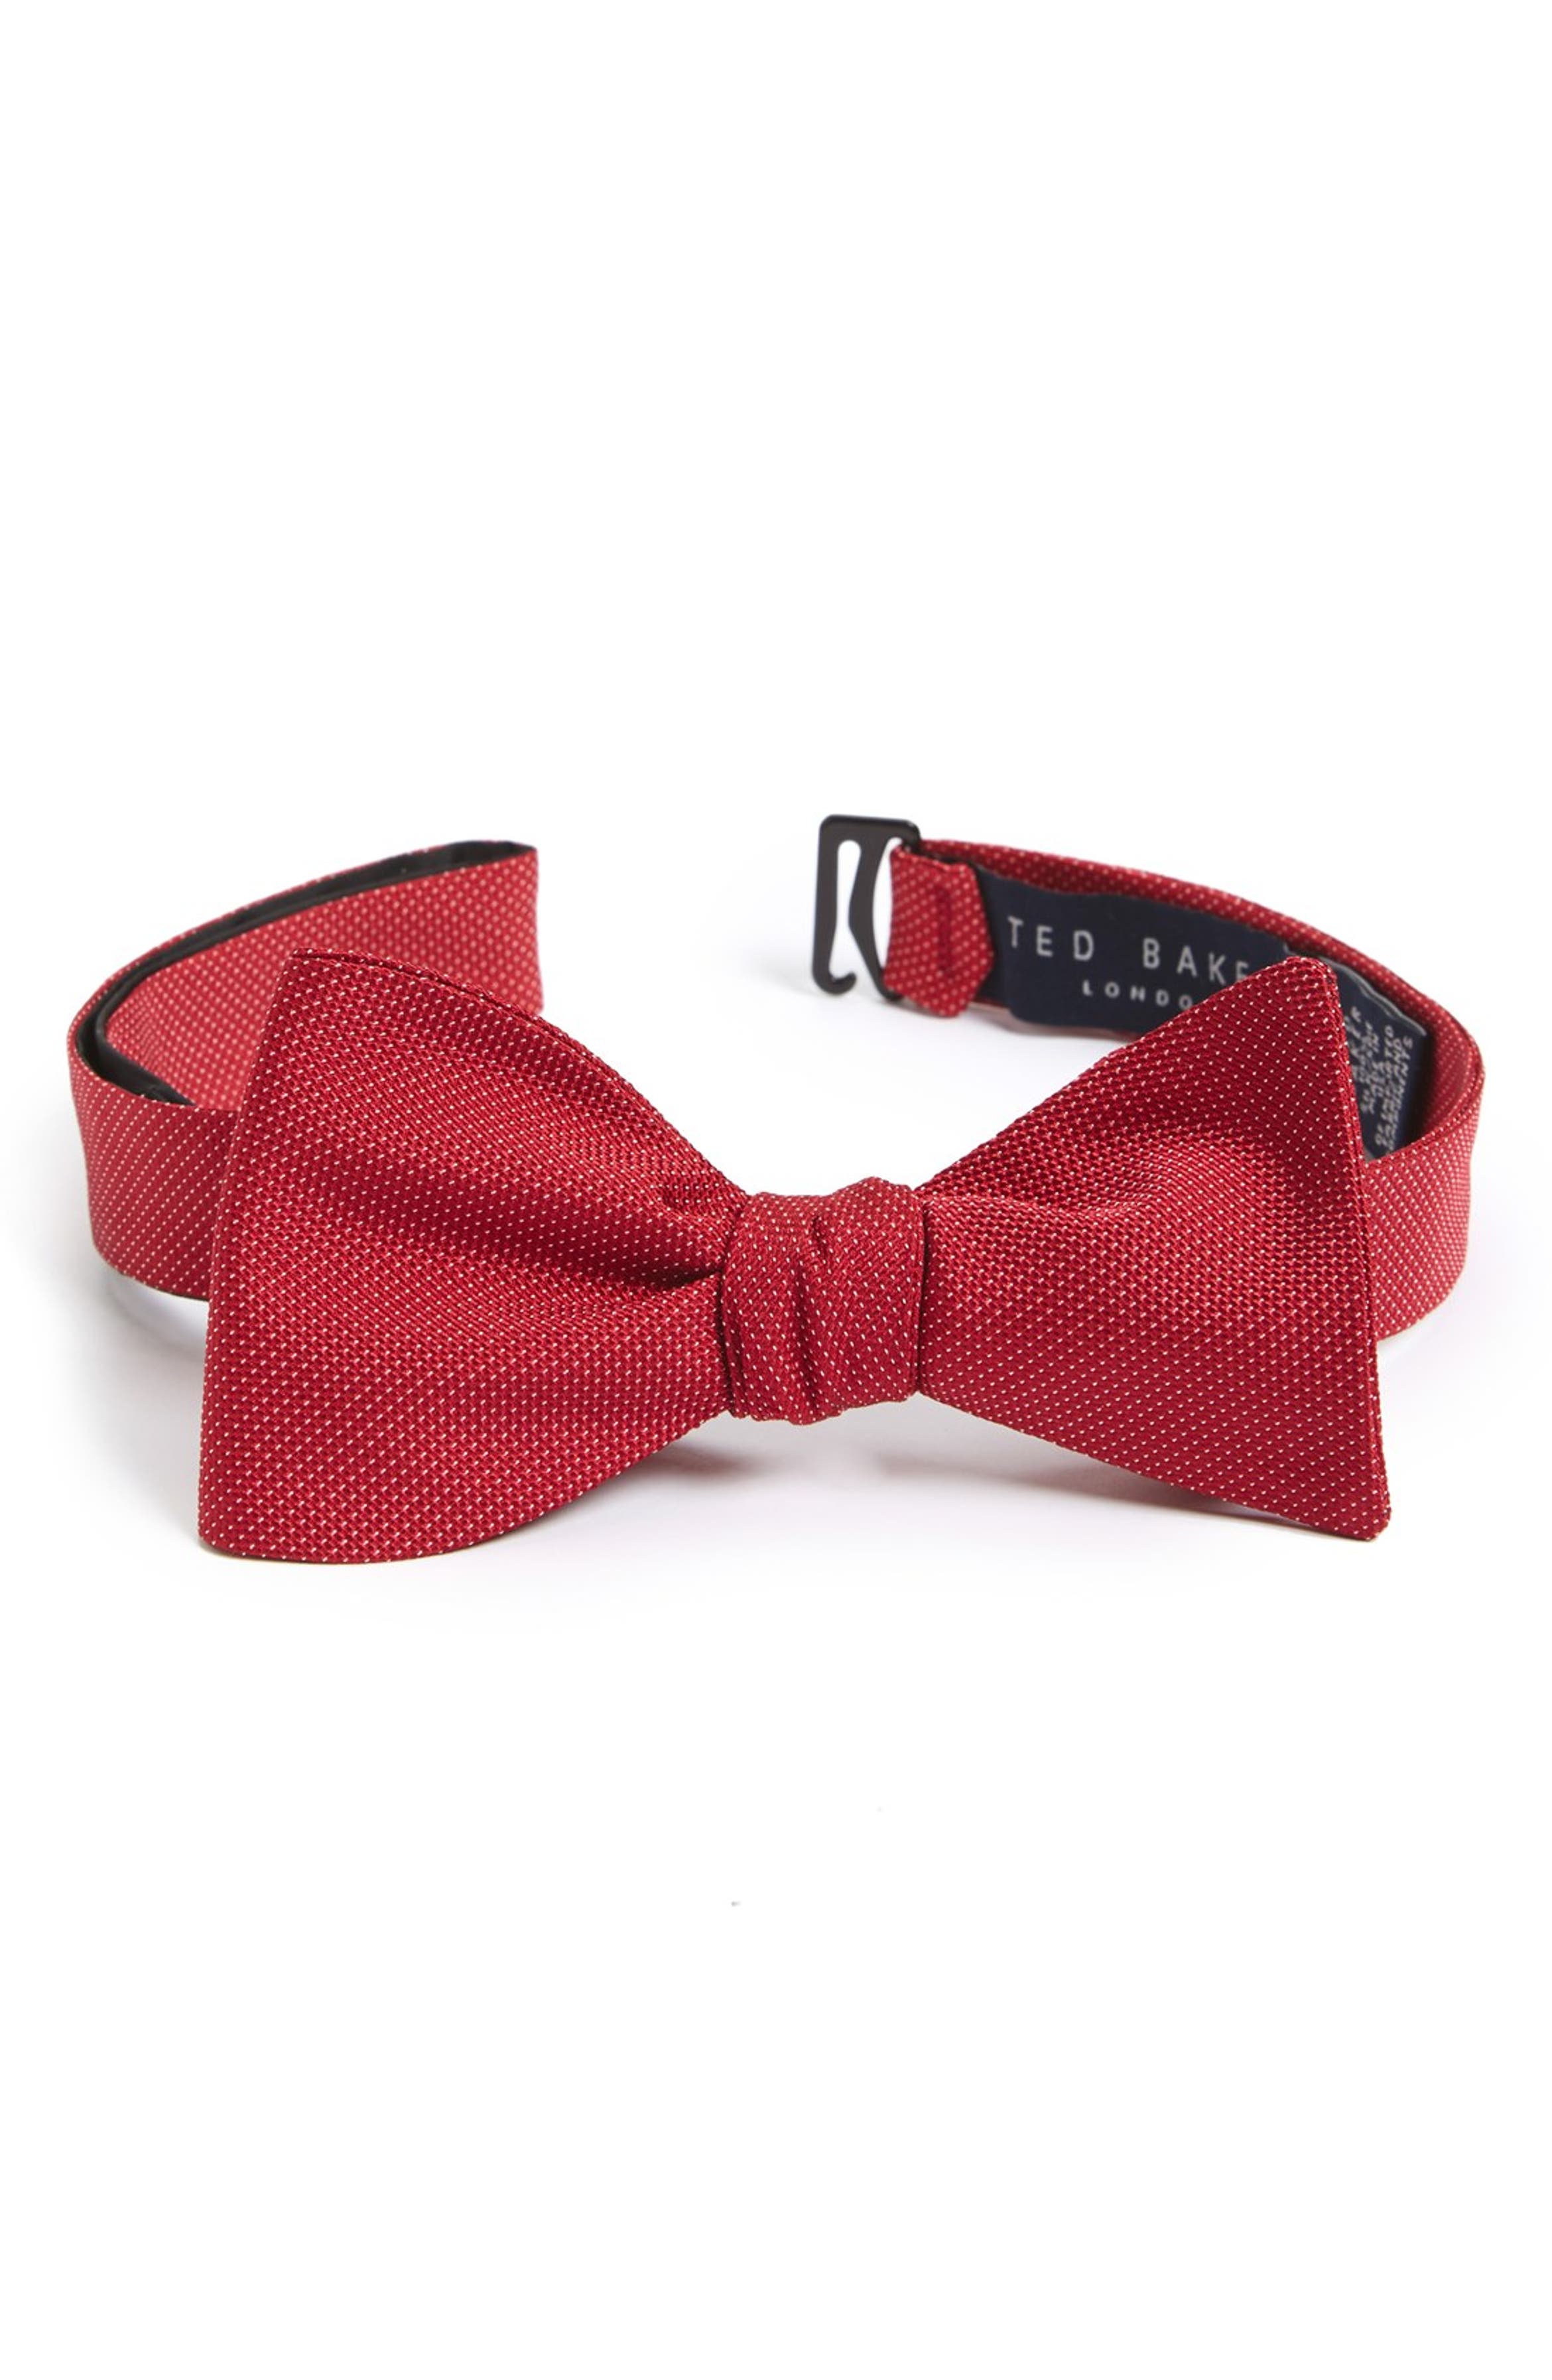 Ted Baker London Check Silk Bow Tie | Nordstrom